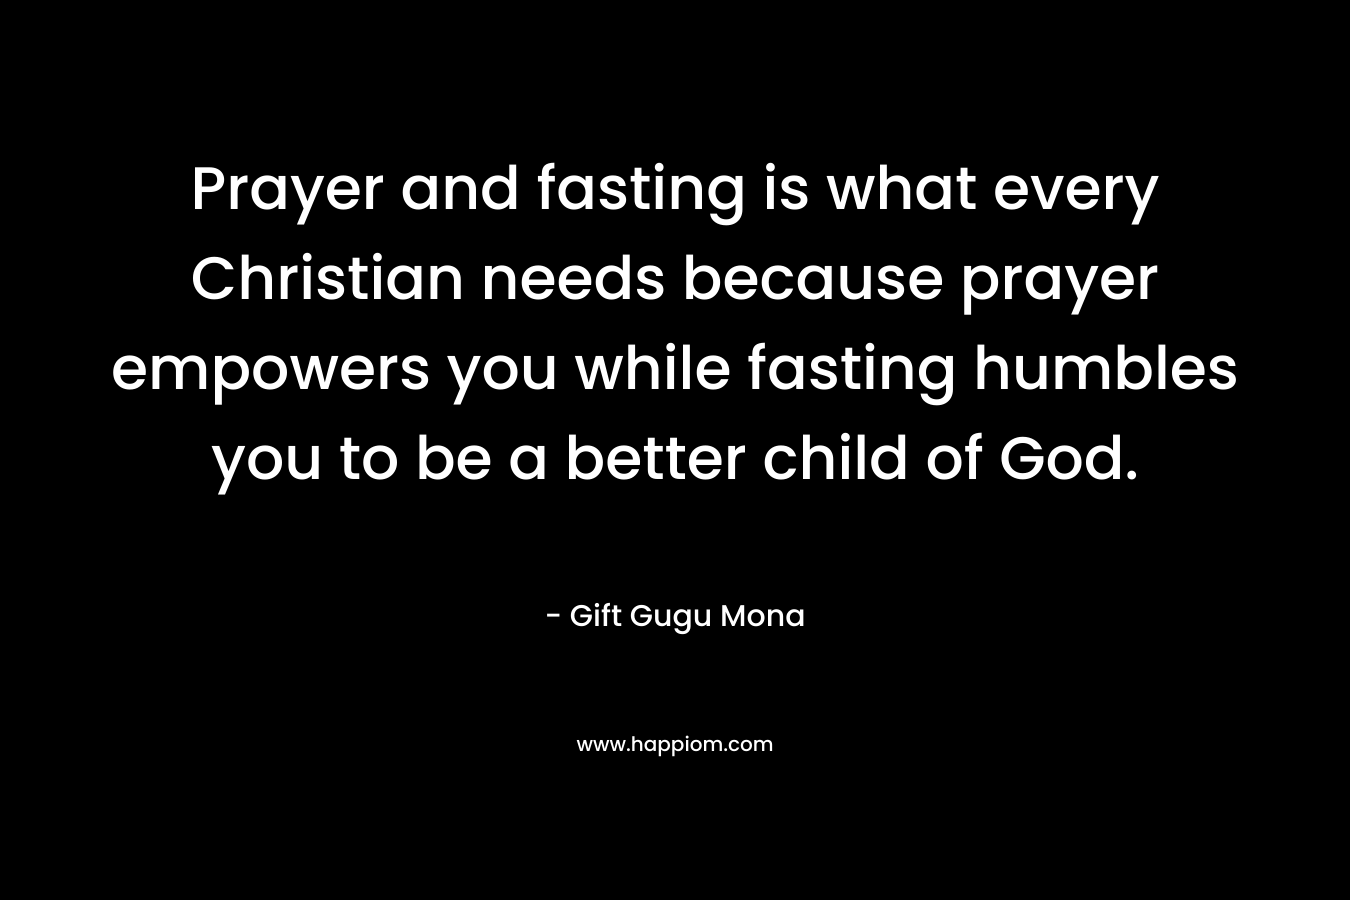 Prayer and fasting is what every Christian needs because prayer empowers you while fasting humbles you to be a better child of God. – Gift Gugu Mona